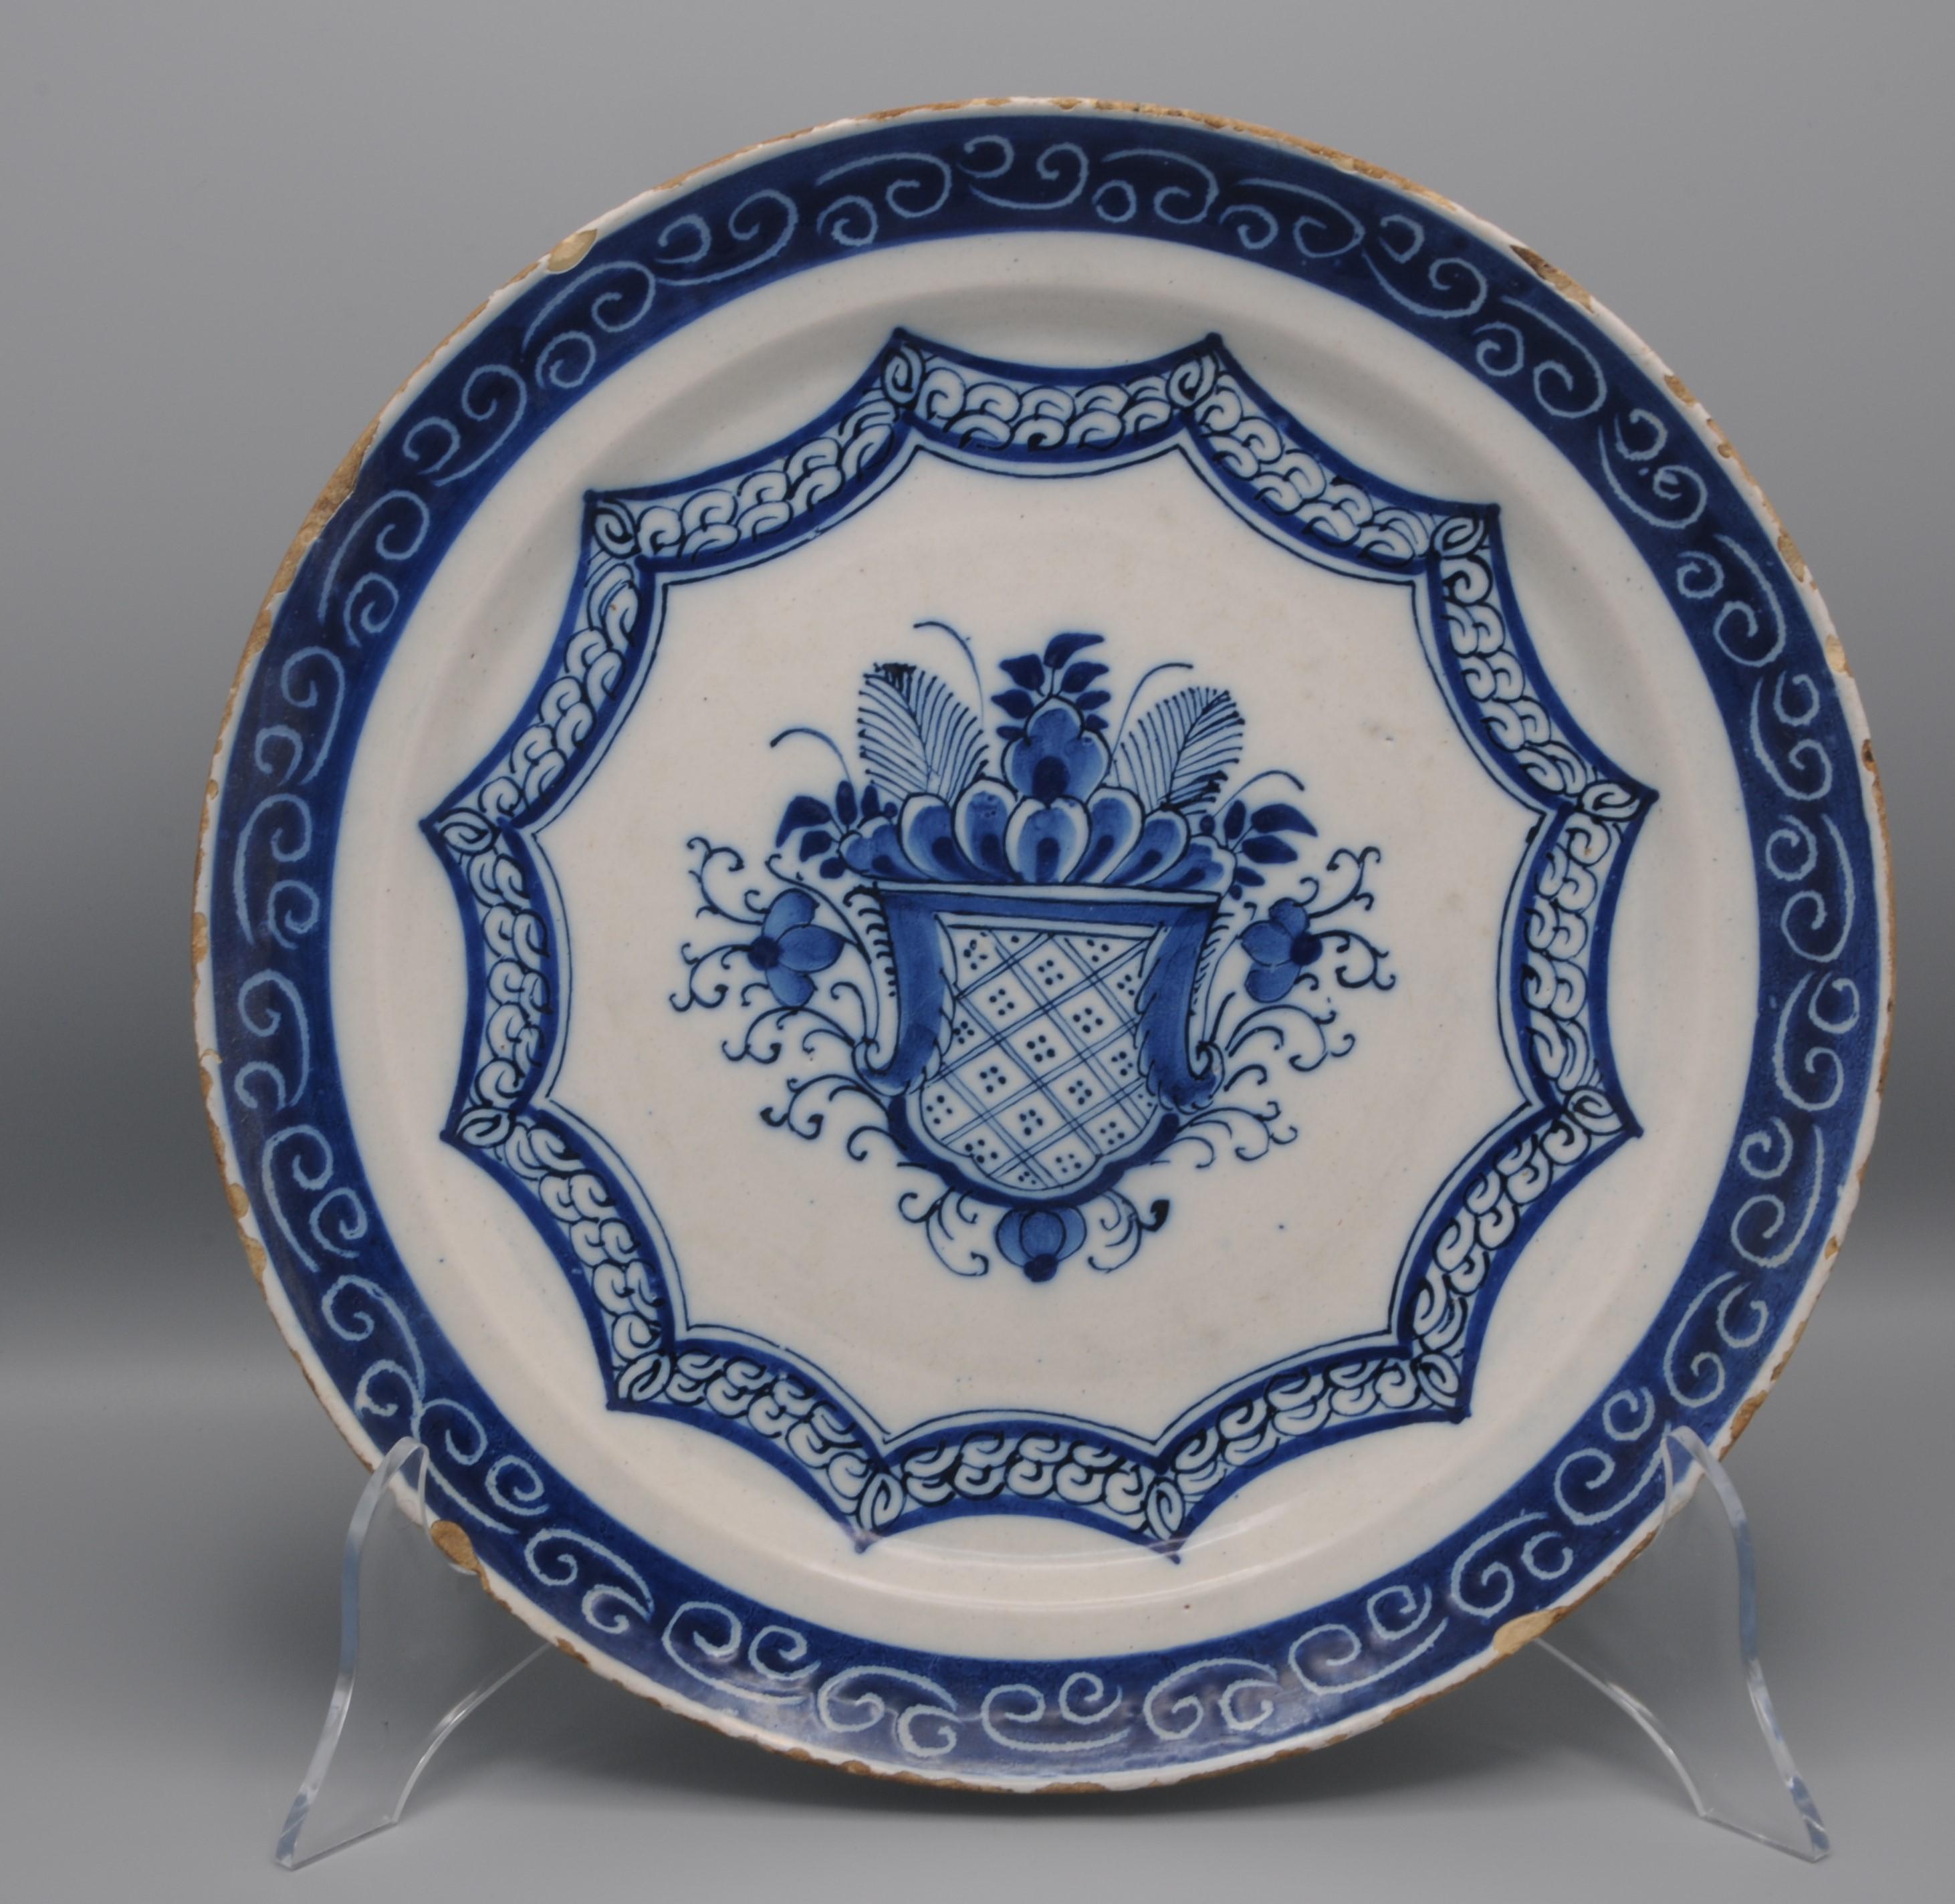 Mid 18th century Blue Delftware platter with Daniel Marot style decoration of a shield amidst flowers and foliage scrolls within a dodecagoon. 
Beautiful border decoration in rich blue with scrolls in 'spare-technique'.
Unmarked
Good quality of